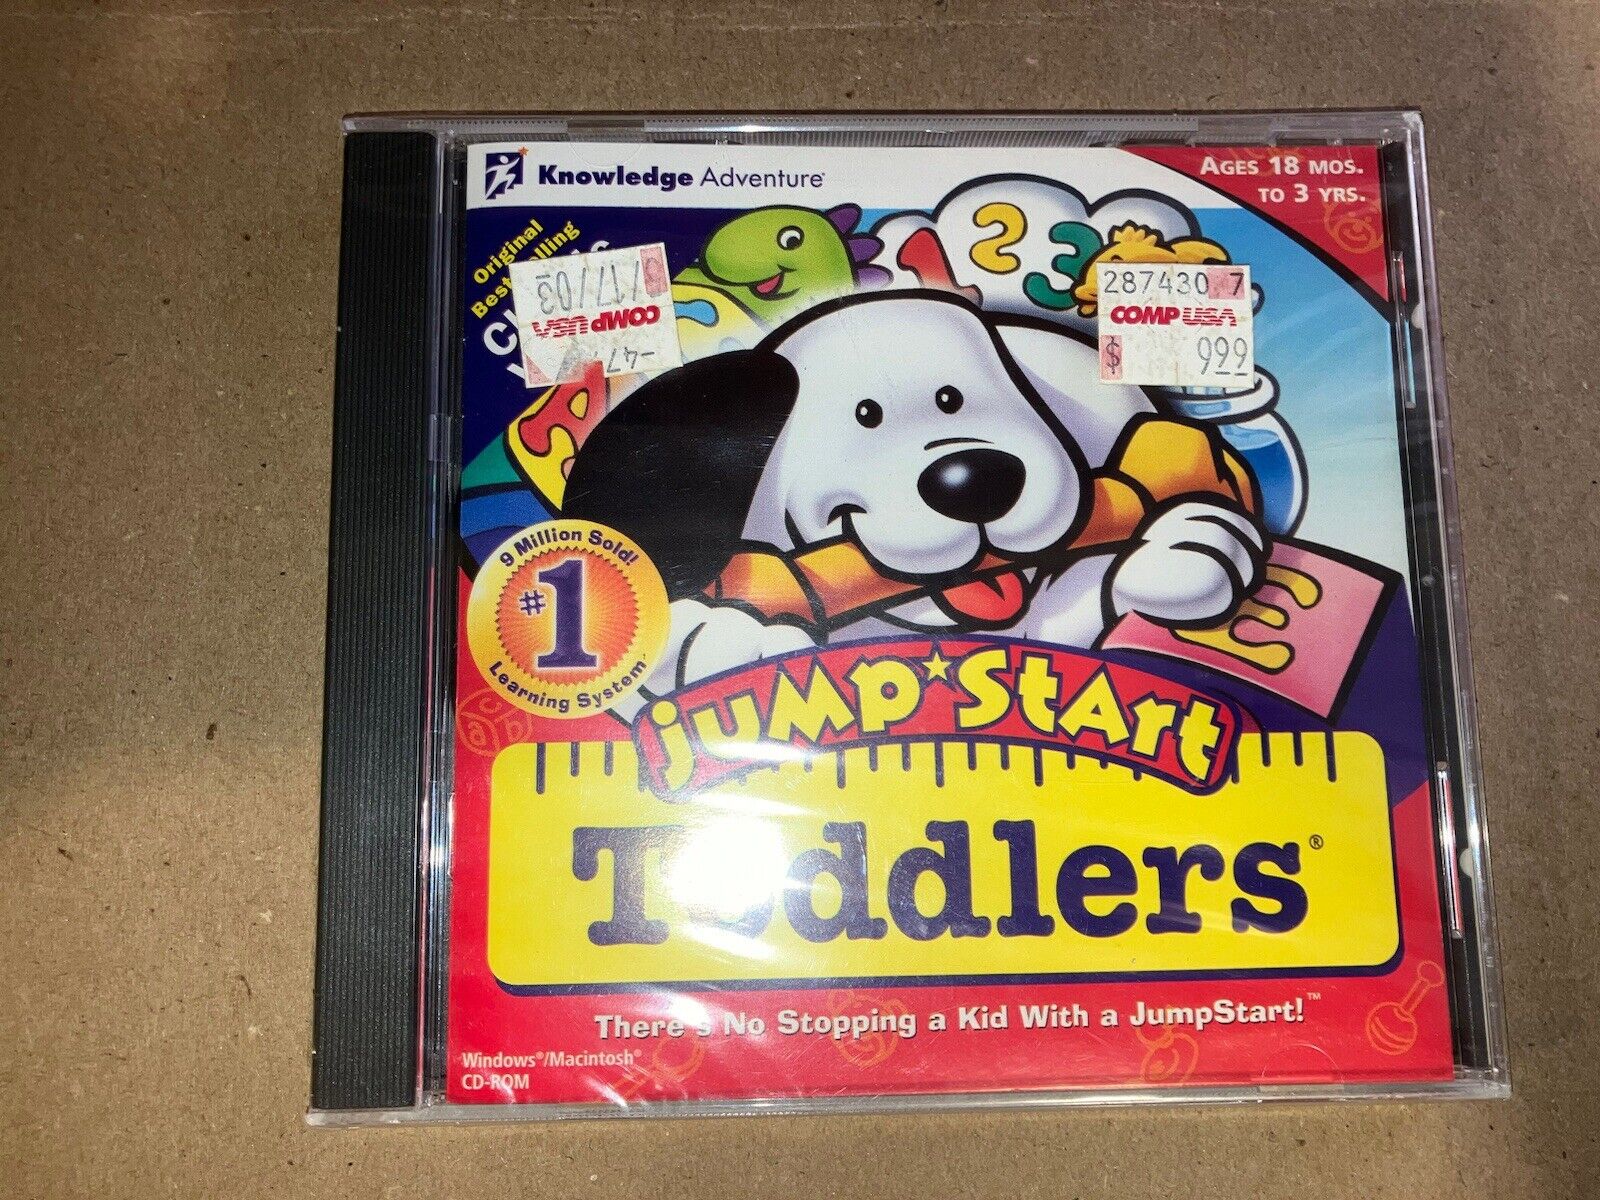 New Jump Start Toddlers Classic Version Windows 98/95 PC CD-ROM Vintage Learning